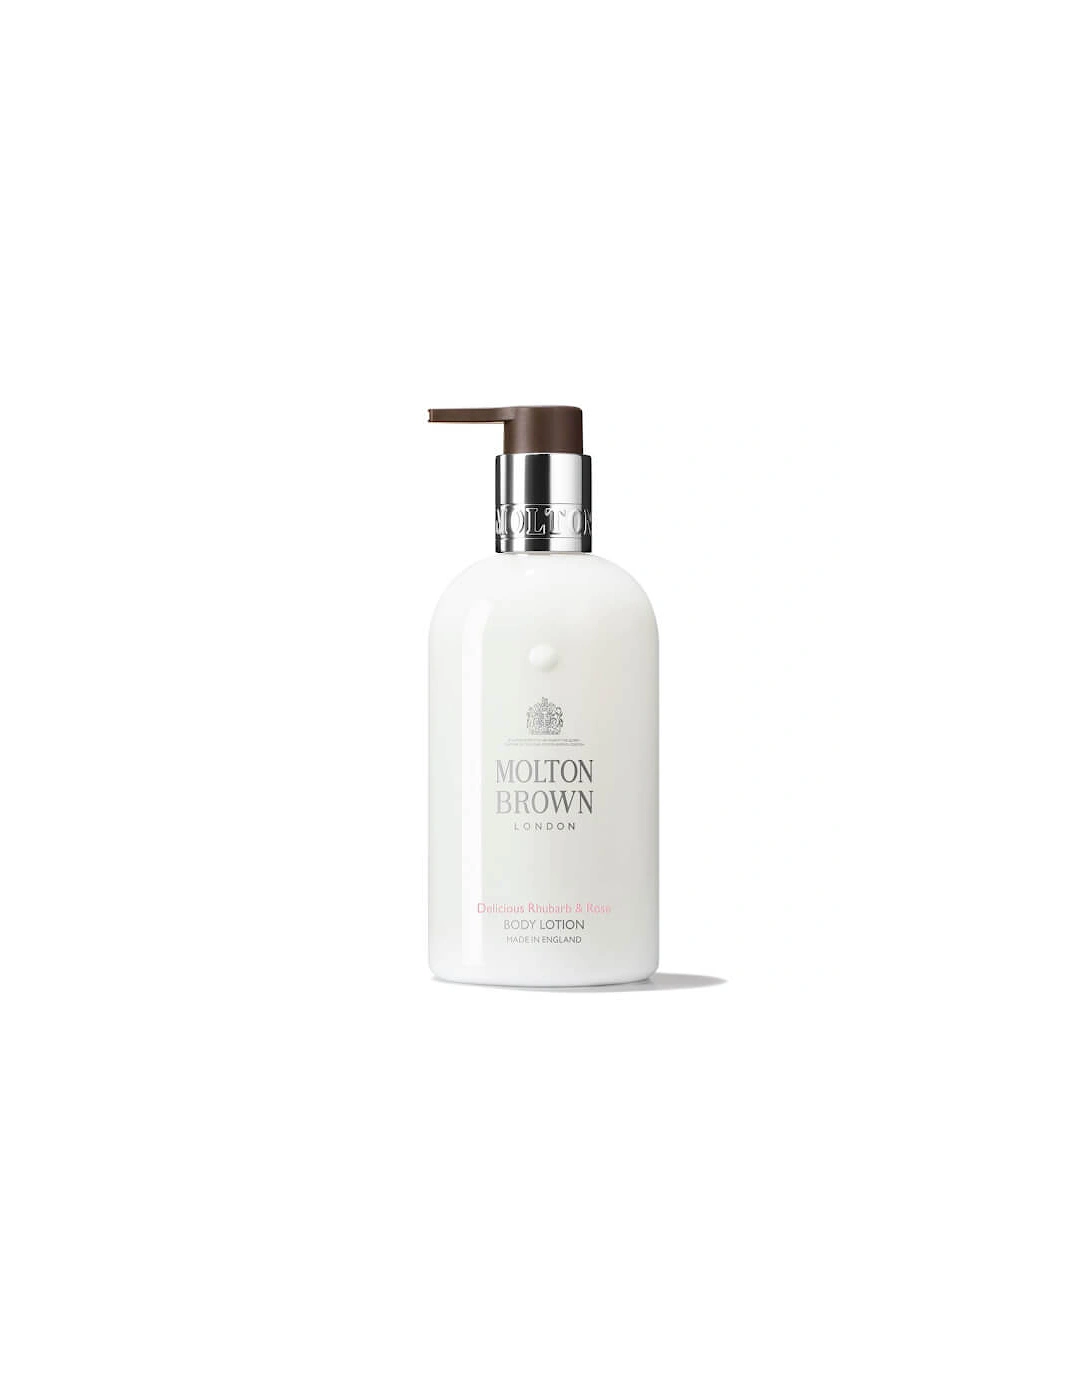 Delicious Rhubarb and Rose Body Lotion (300ml) - - Delicious Rhubarb and Rose Body Lotion (300ml) - Sharon 72, 2 of 1